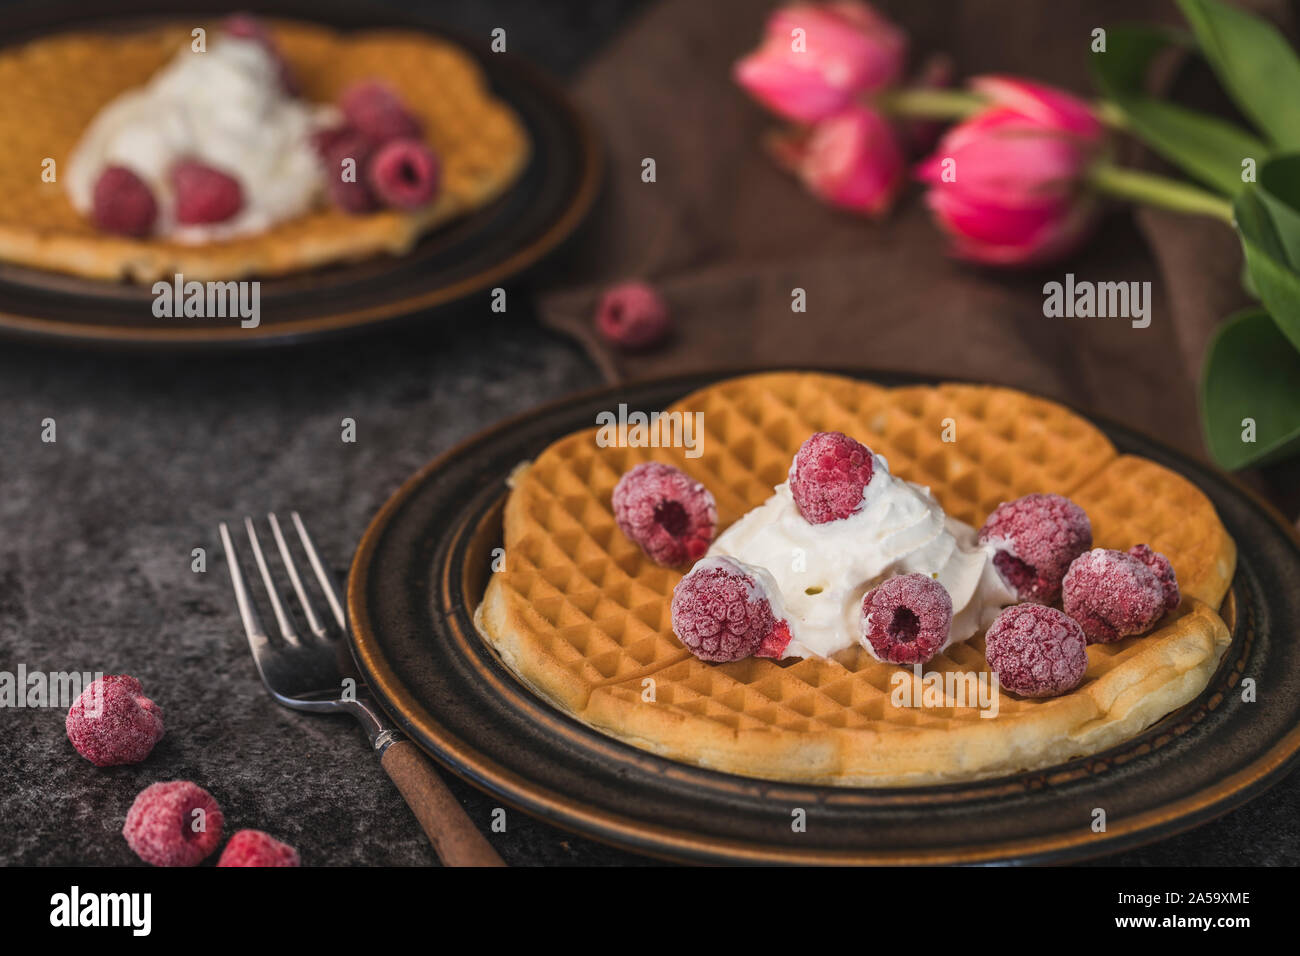 Homemade waffles with whipped cream and organic raspberries. The waffles are on two brown plates on a dark gray background, and there are some red tul Stock Photo